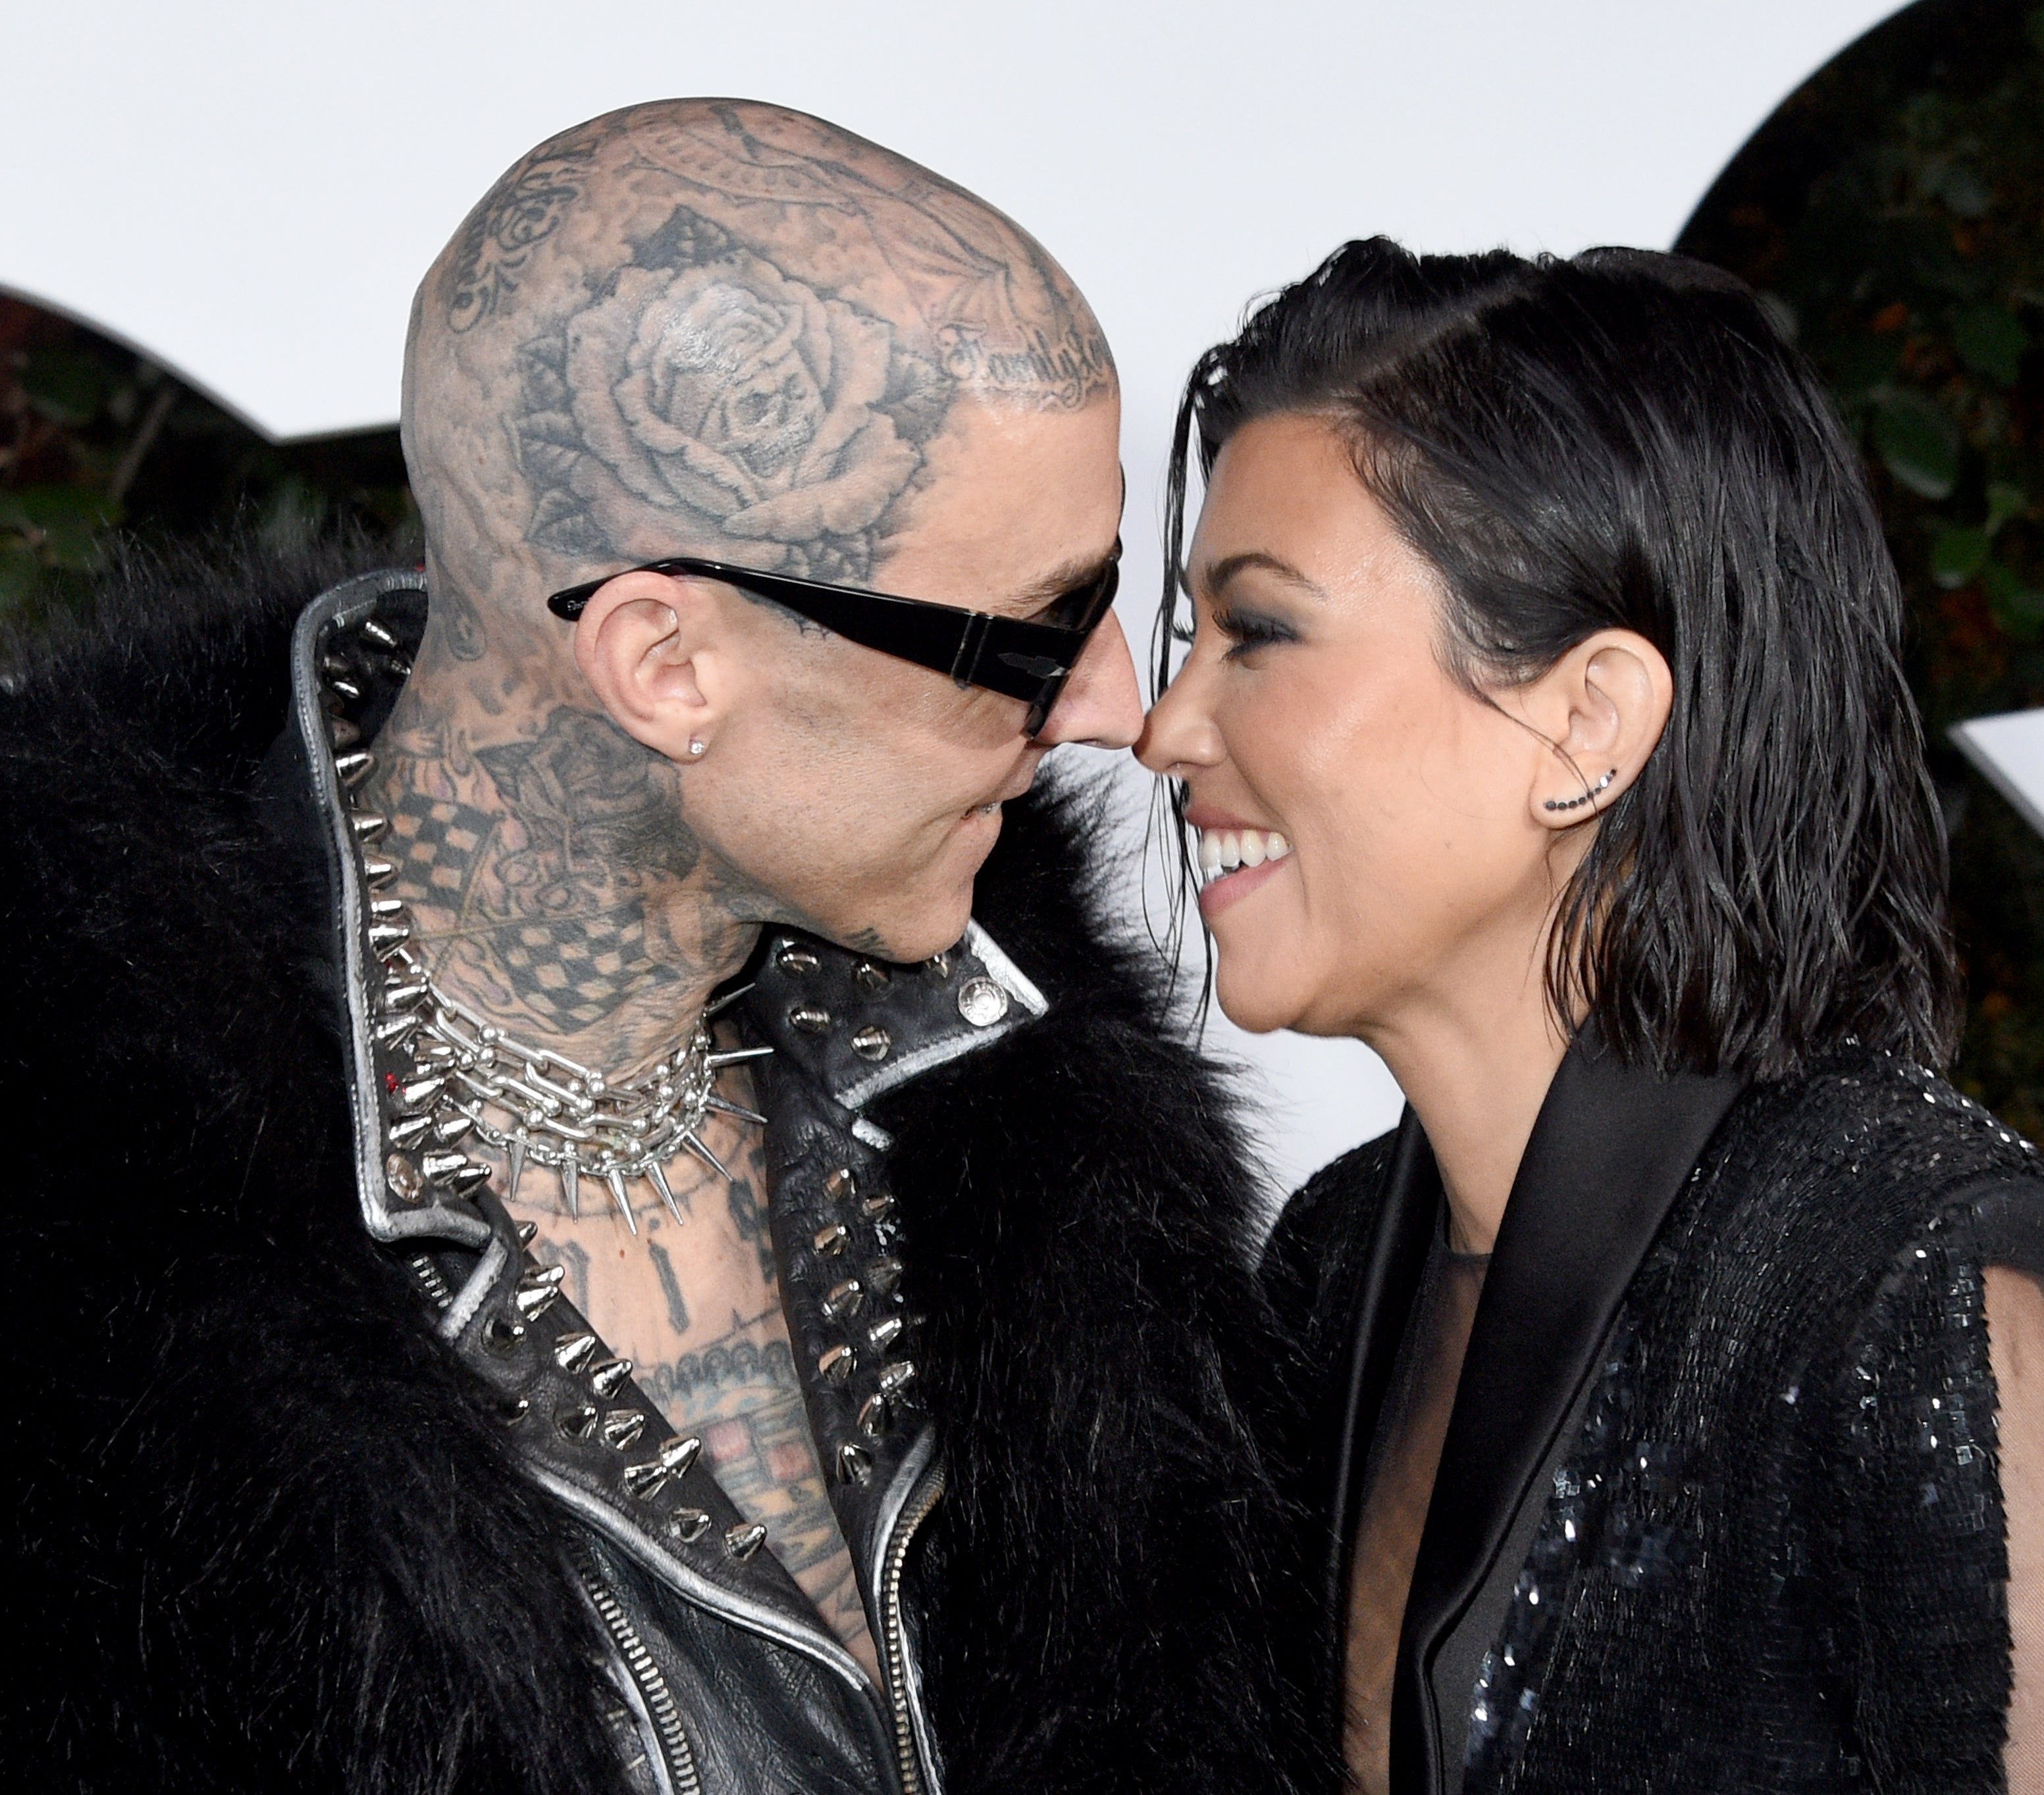 Travis Barker and Kourtney Kardashian smiling and touching noses at an event